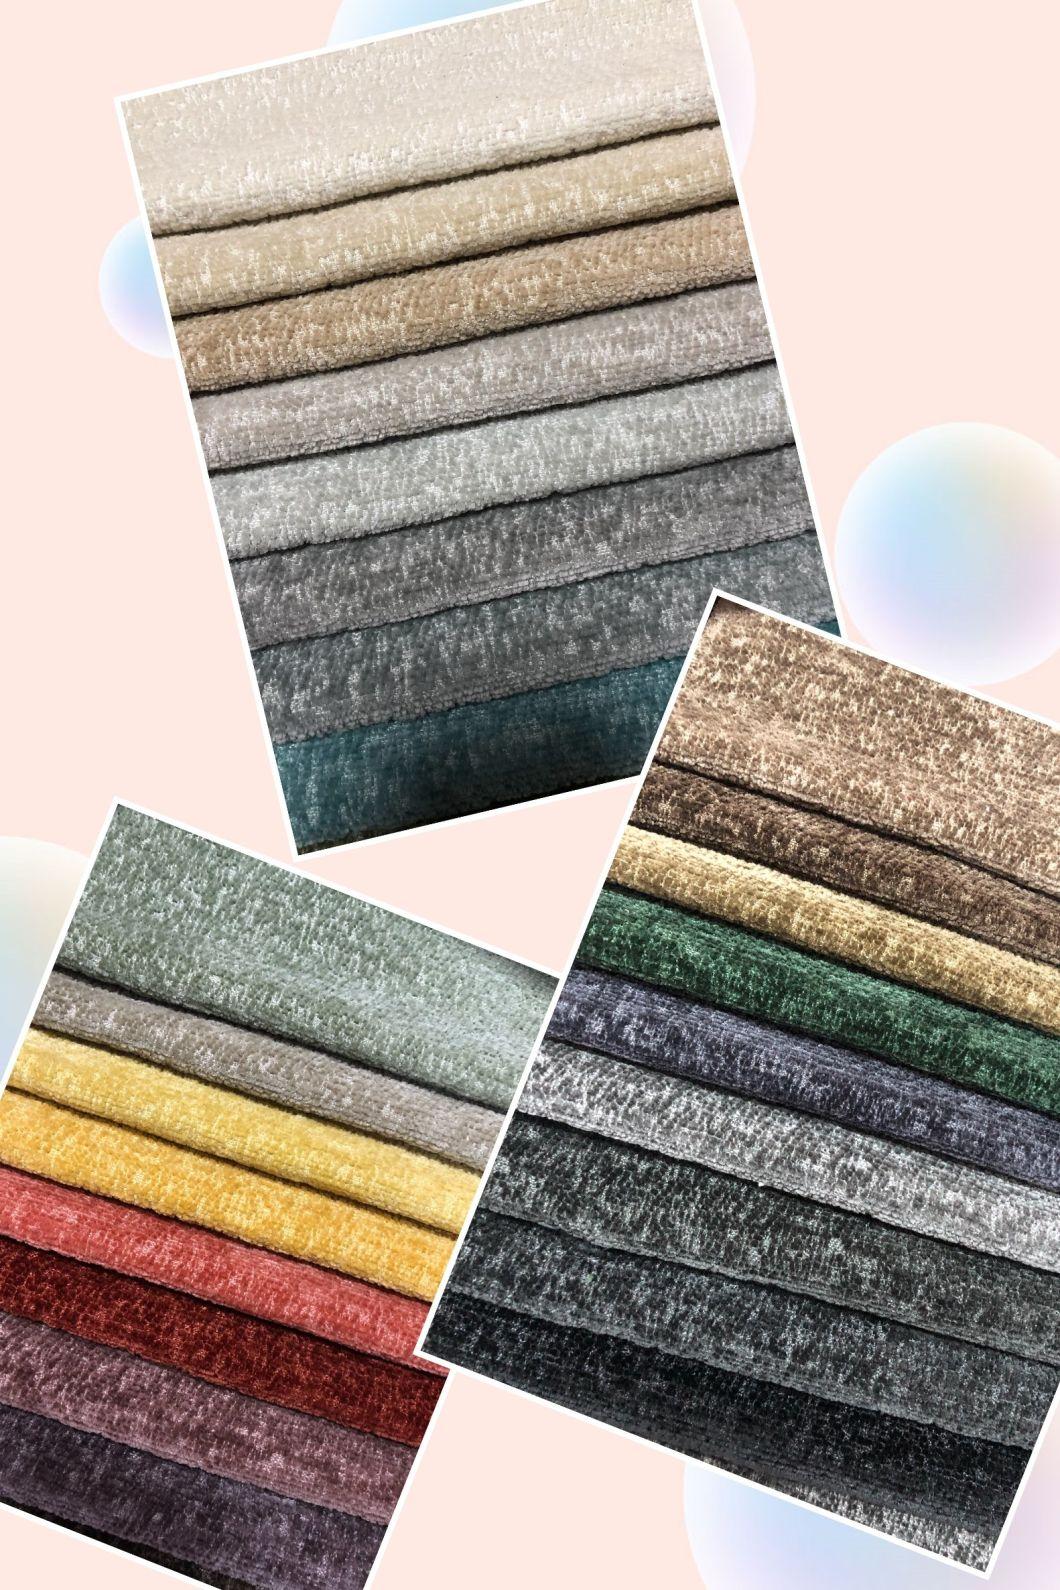 100%Polyester Chenille Fabric Sofa and Furniture Upholstery Fabric (ZN252)